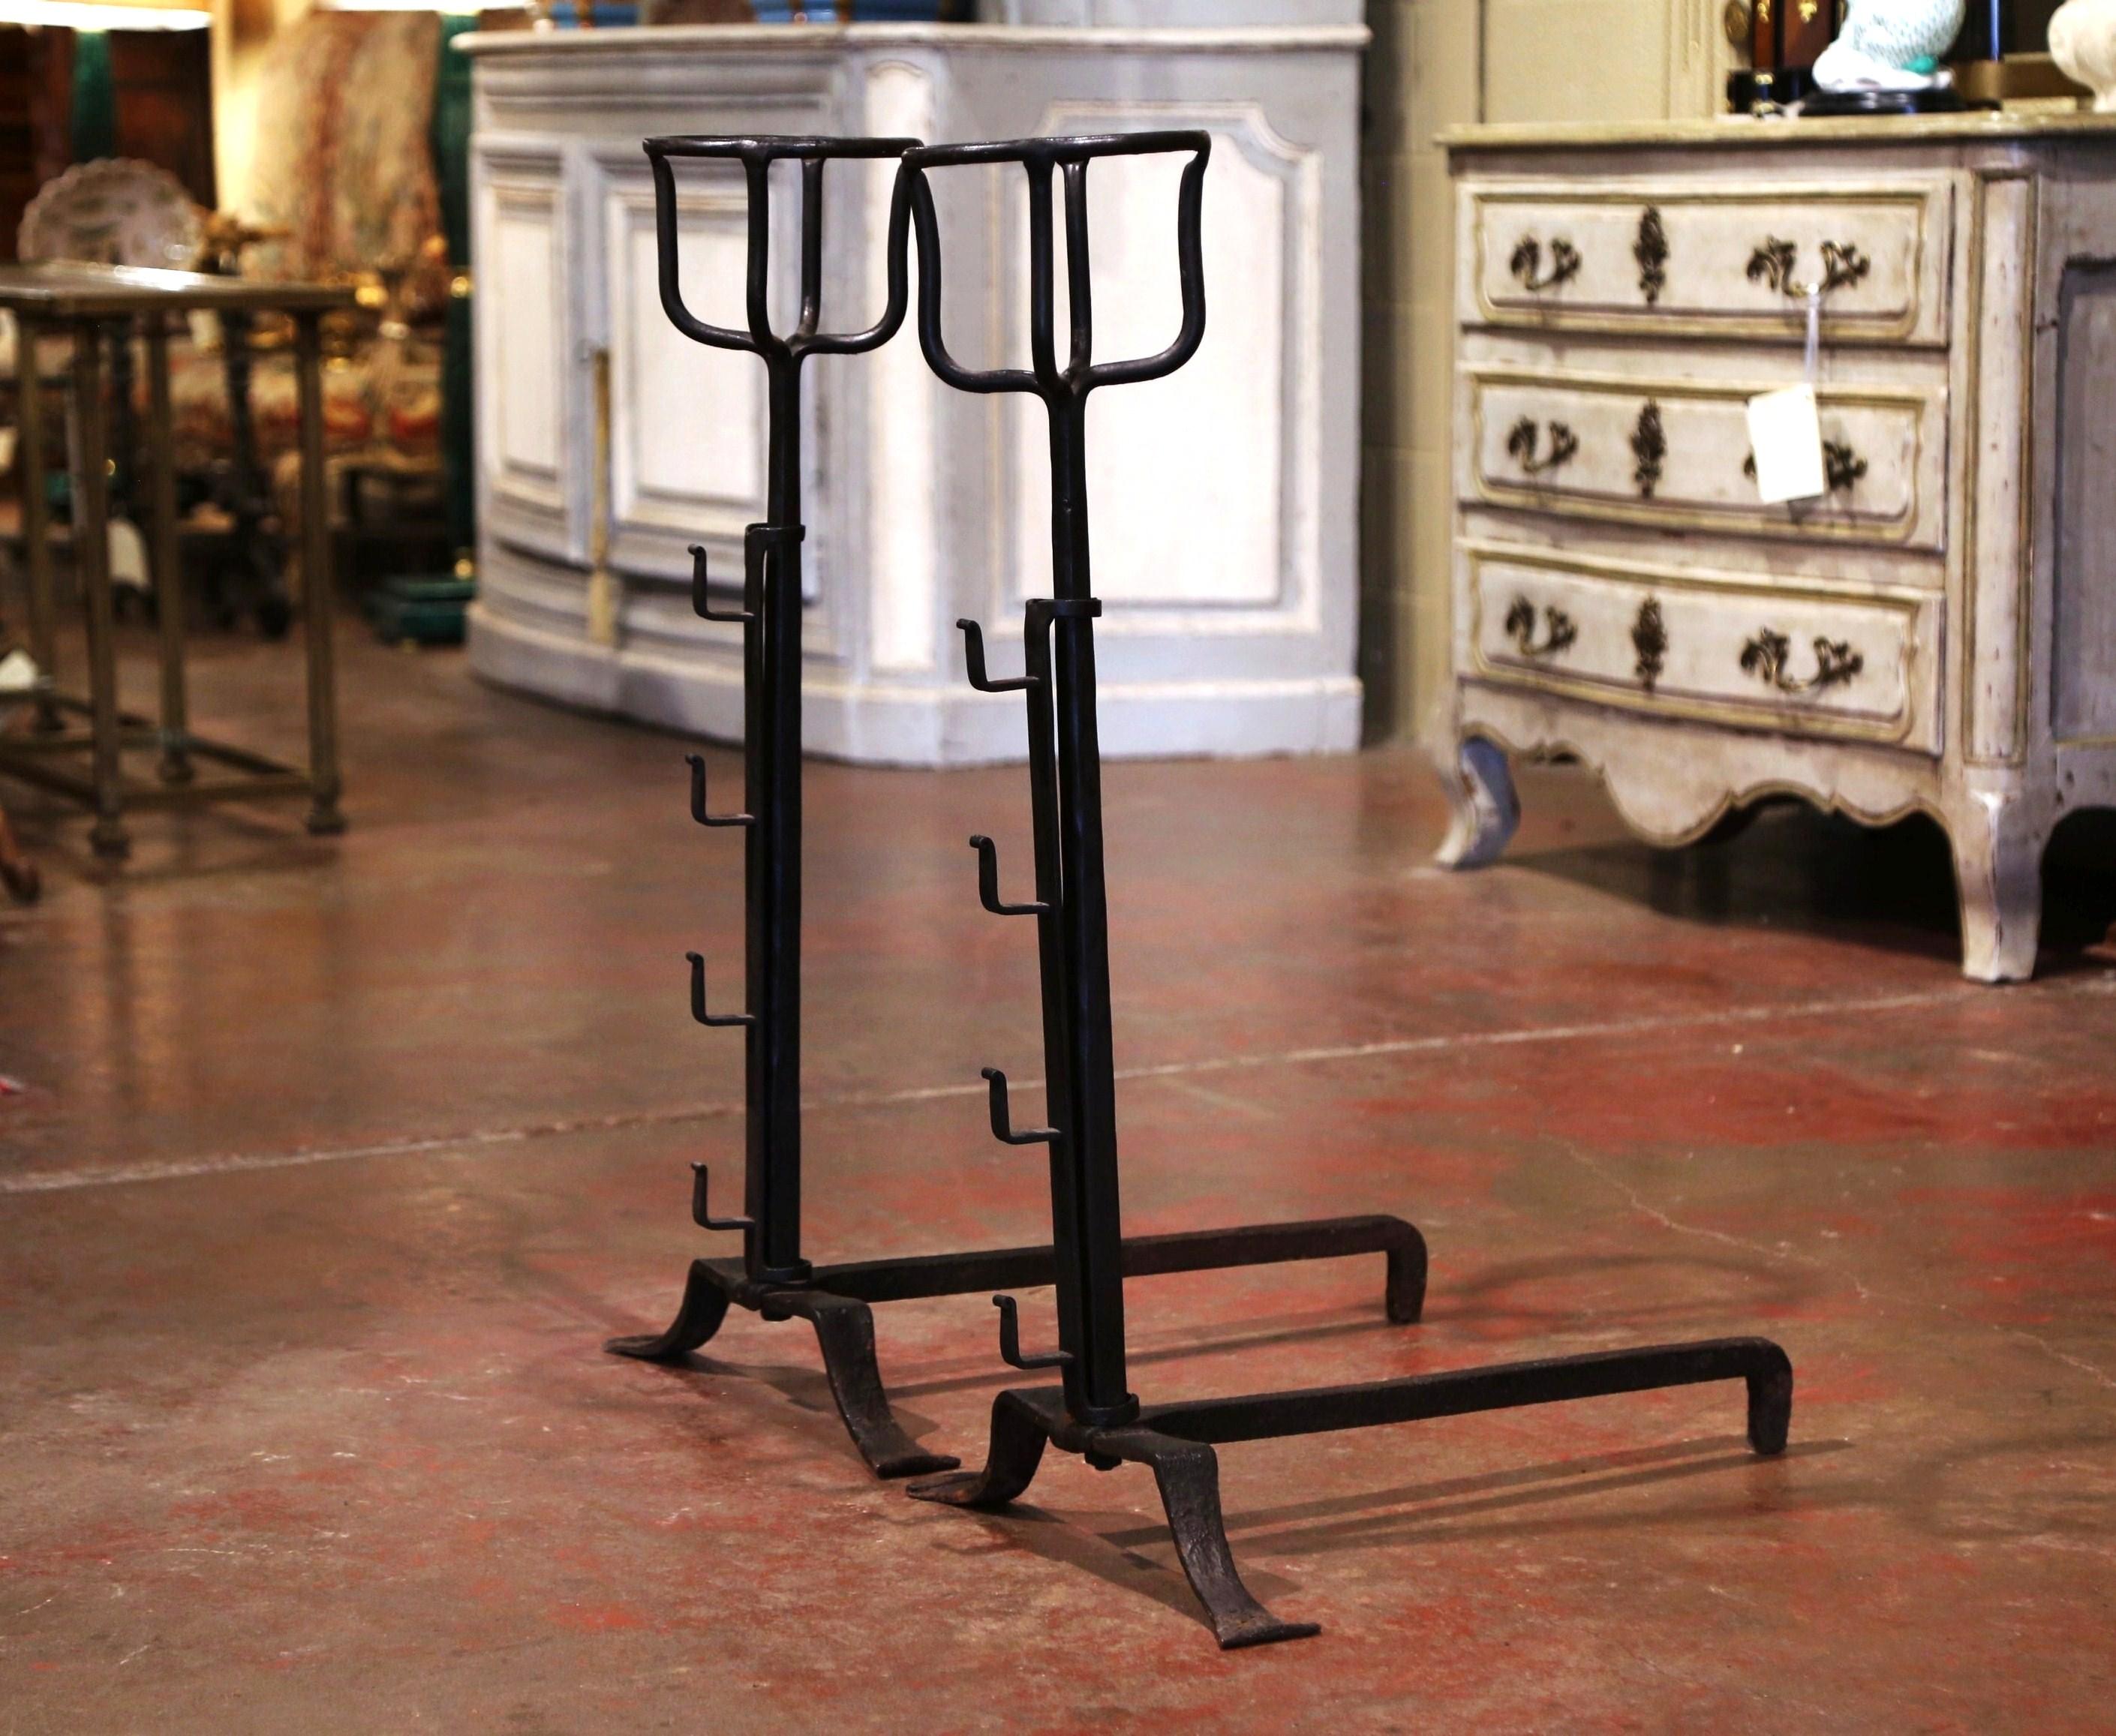 Forged in France, circa 1860, the antique andirons stand on three legs with hooks to hold decorative bar across. They feature a cupped, round shaped top; called a 